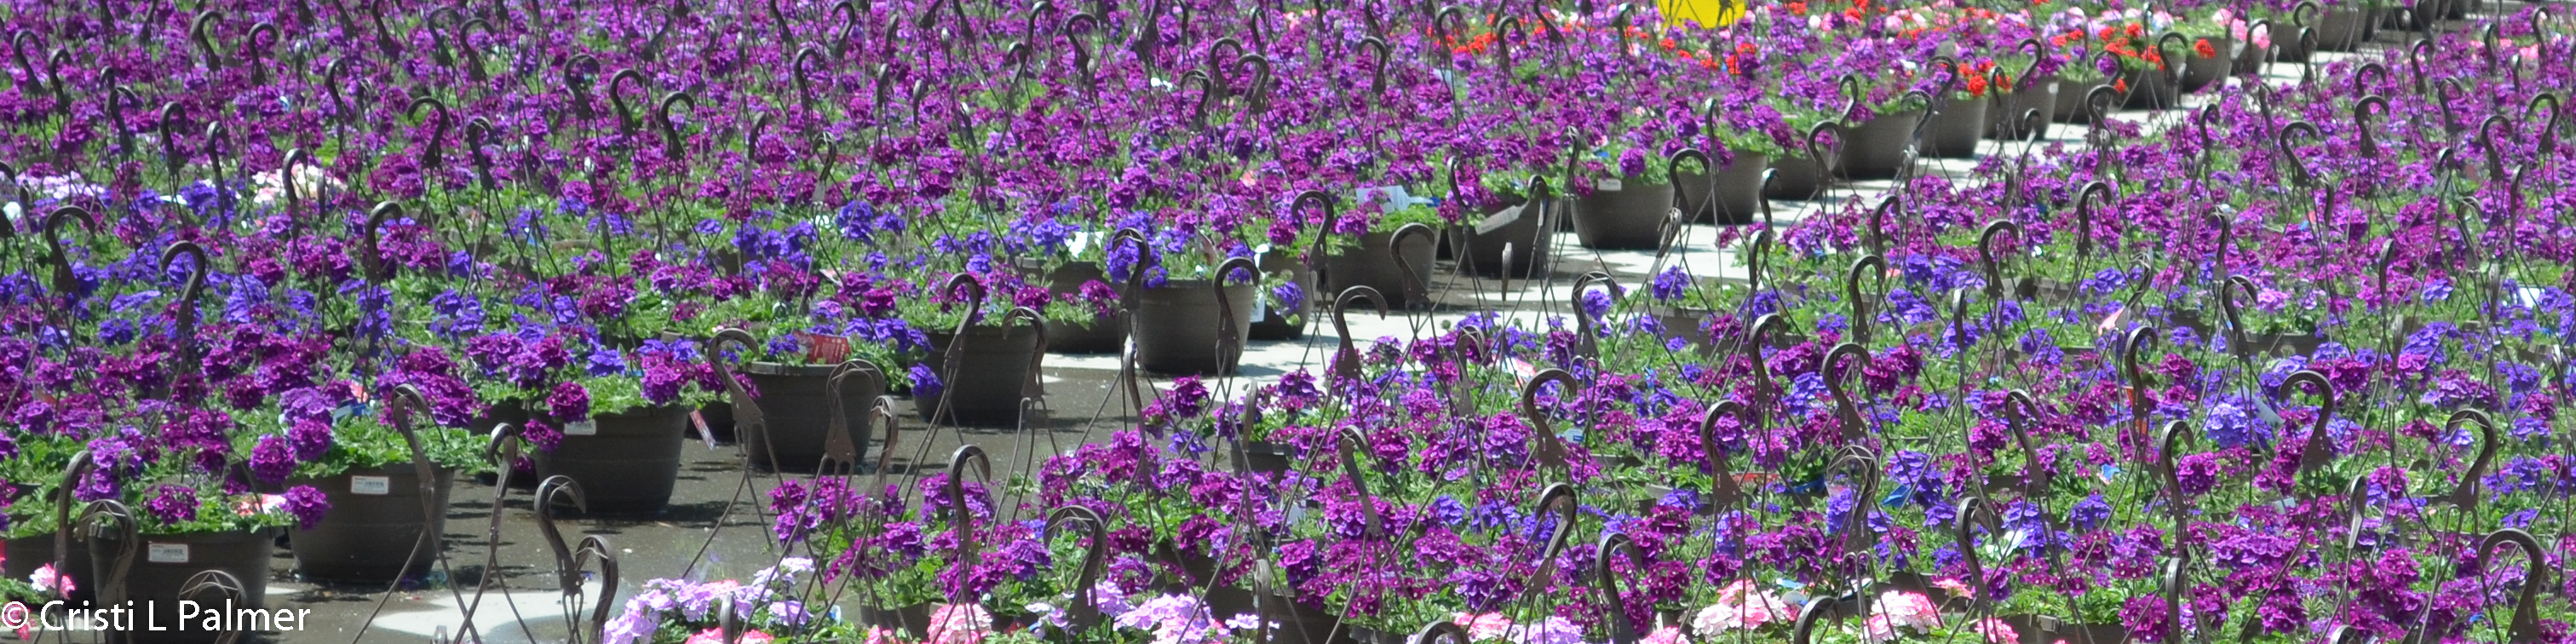 Hundreds of blooming hanging baskets growing outdoors on cement slab at commercial operation